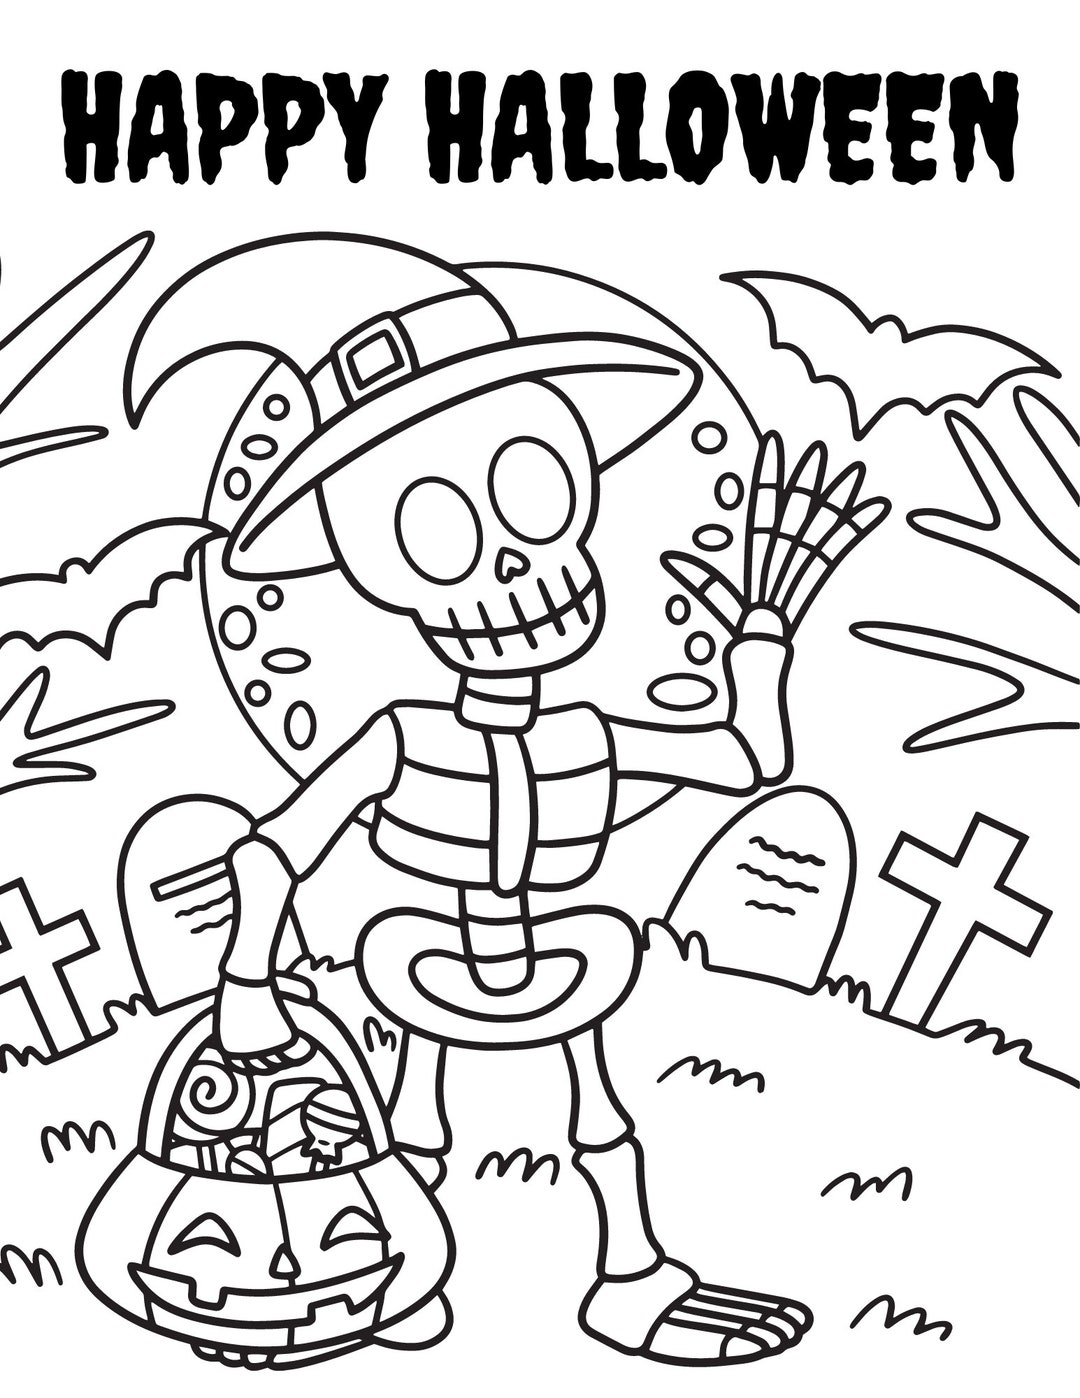 Halloween Stationary and Coloring Pages for Kids - Etsy